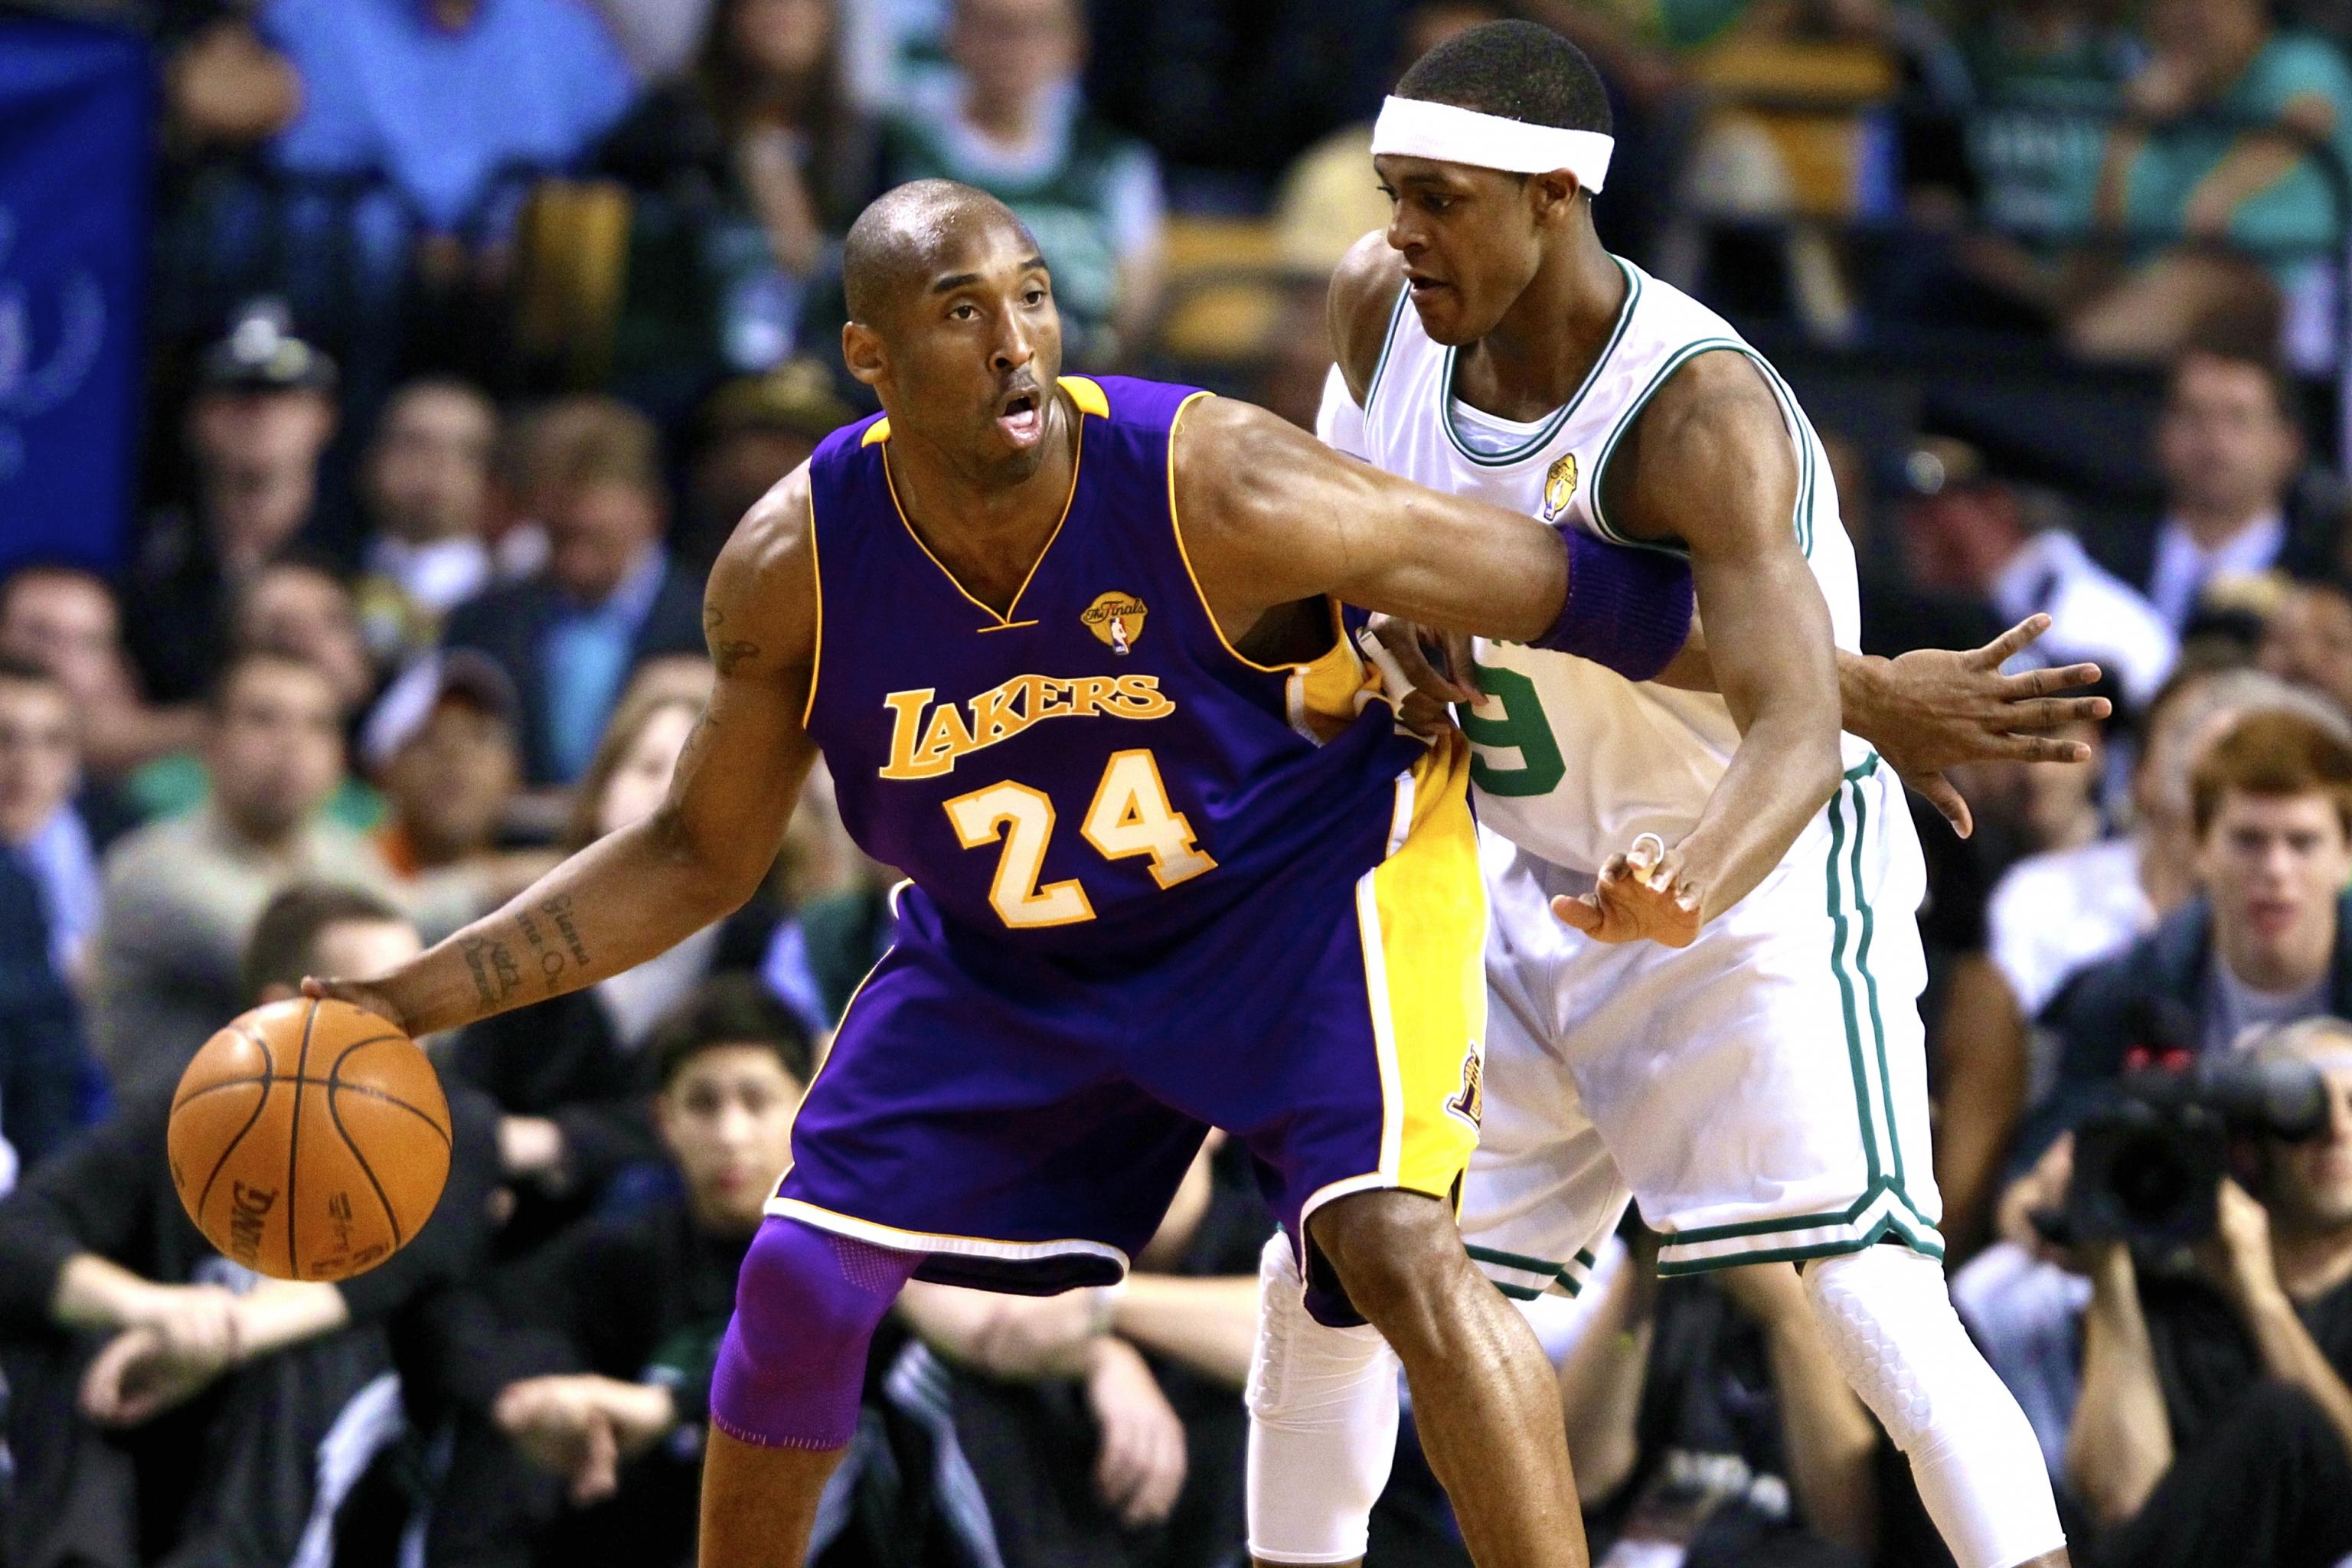 Report: Lakers covet Rajon Rondo, who just breakfasted with Kobe Bryant, in  free agency - NBC Sports